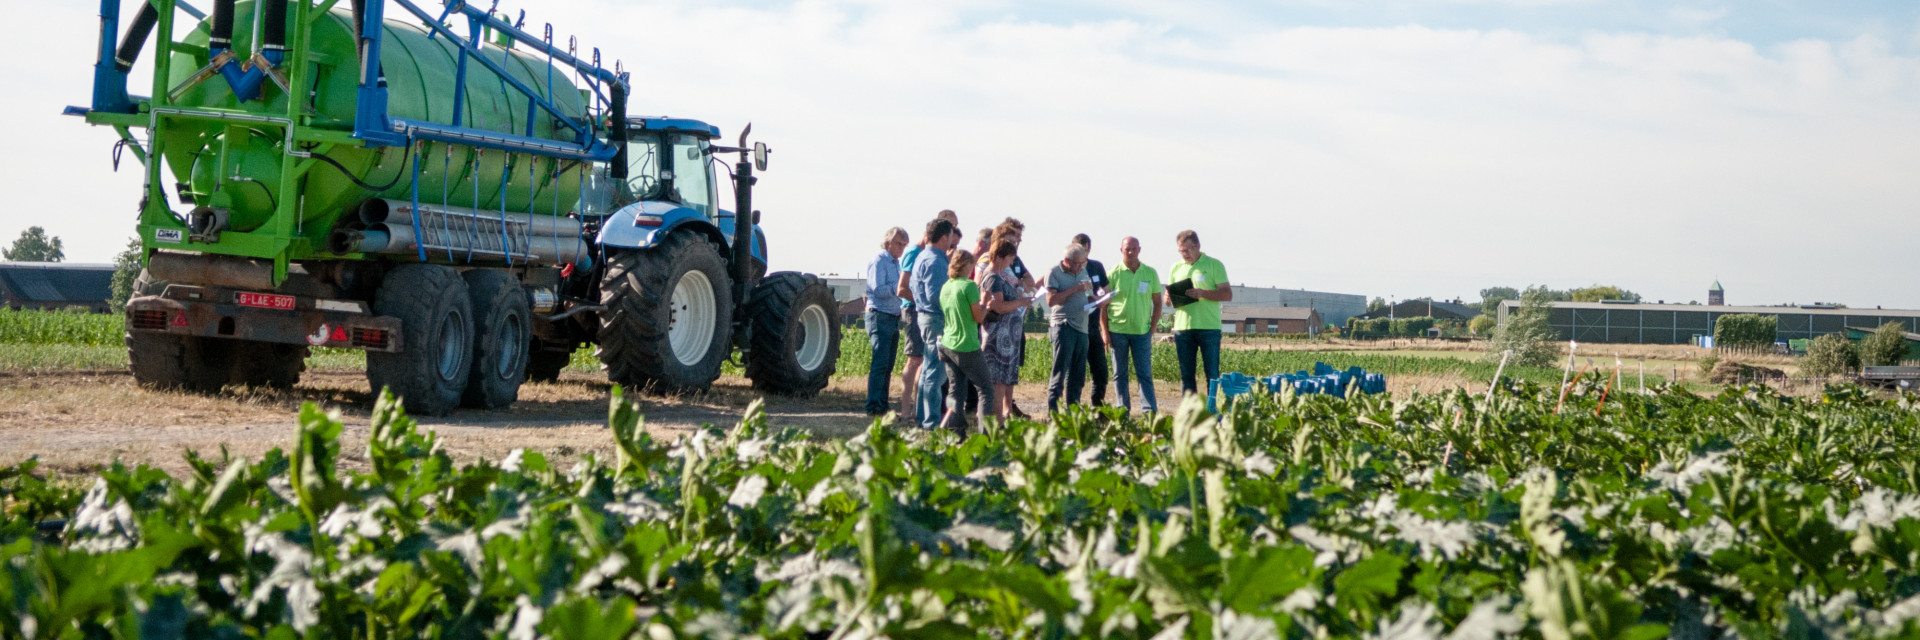 Photo of a field of crops with a large agricultural vehicle in the middle and a group of people wearing high vis jackets standing nearby.